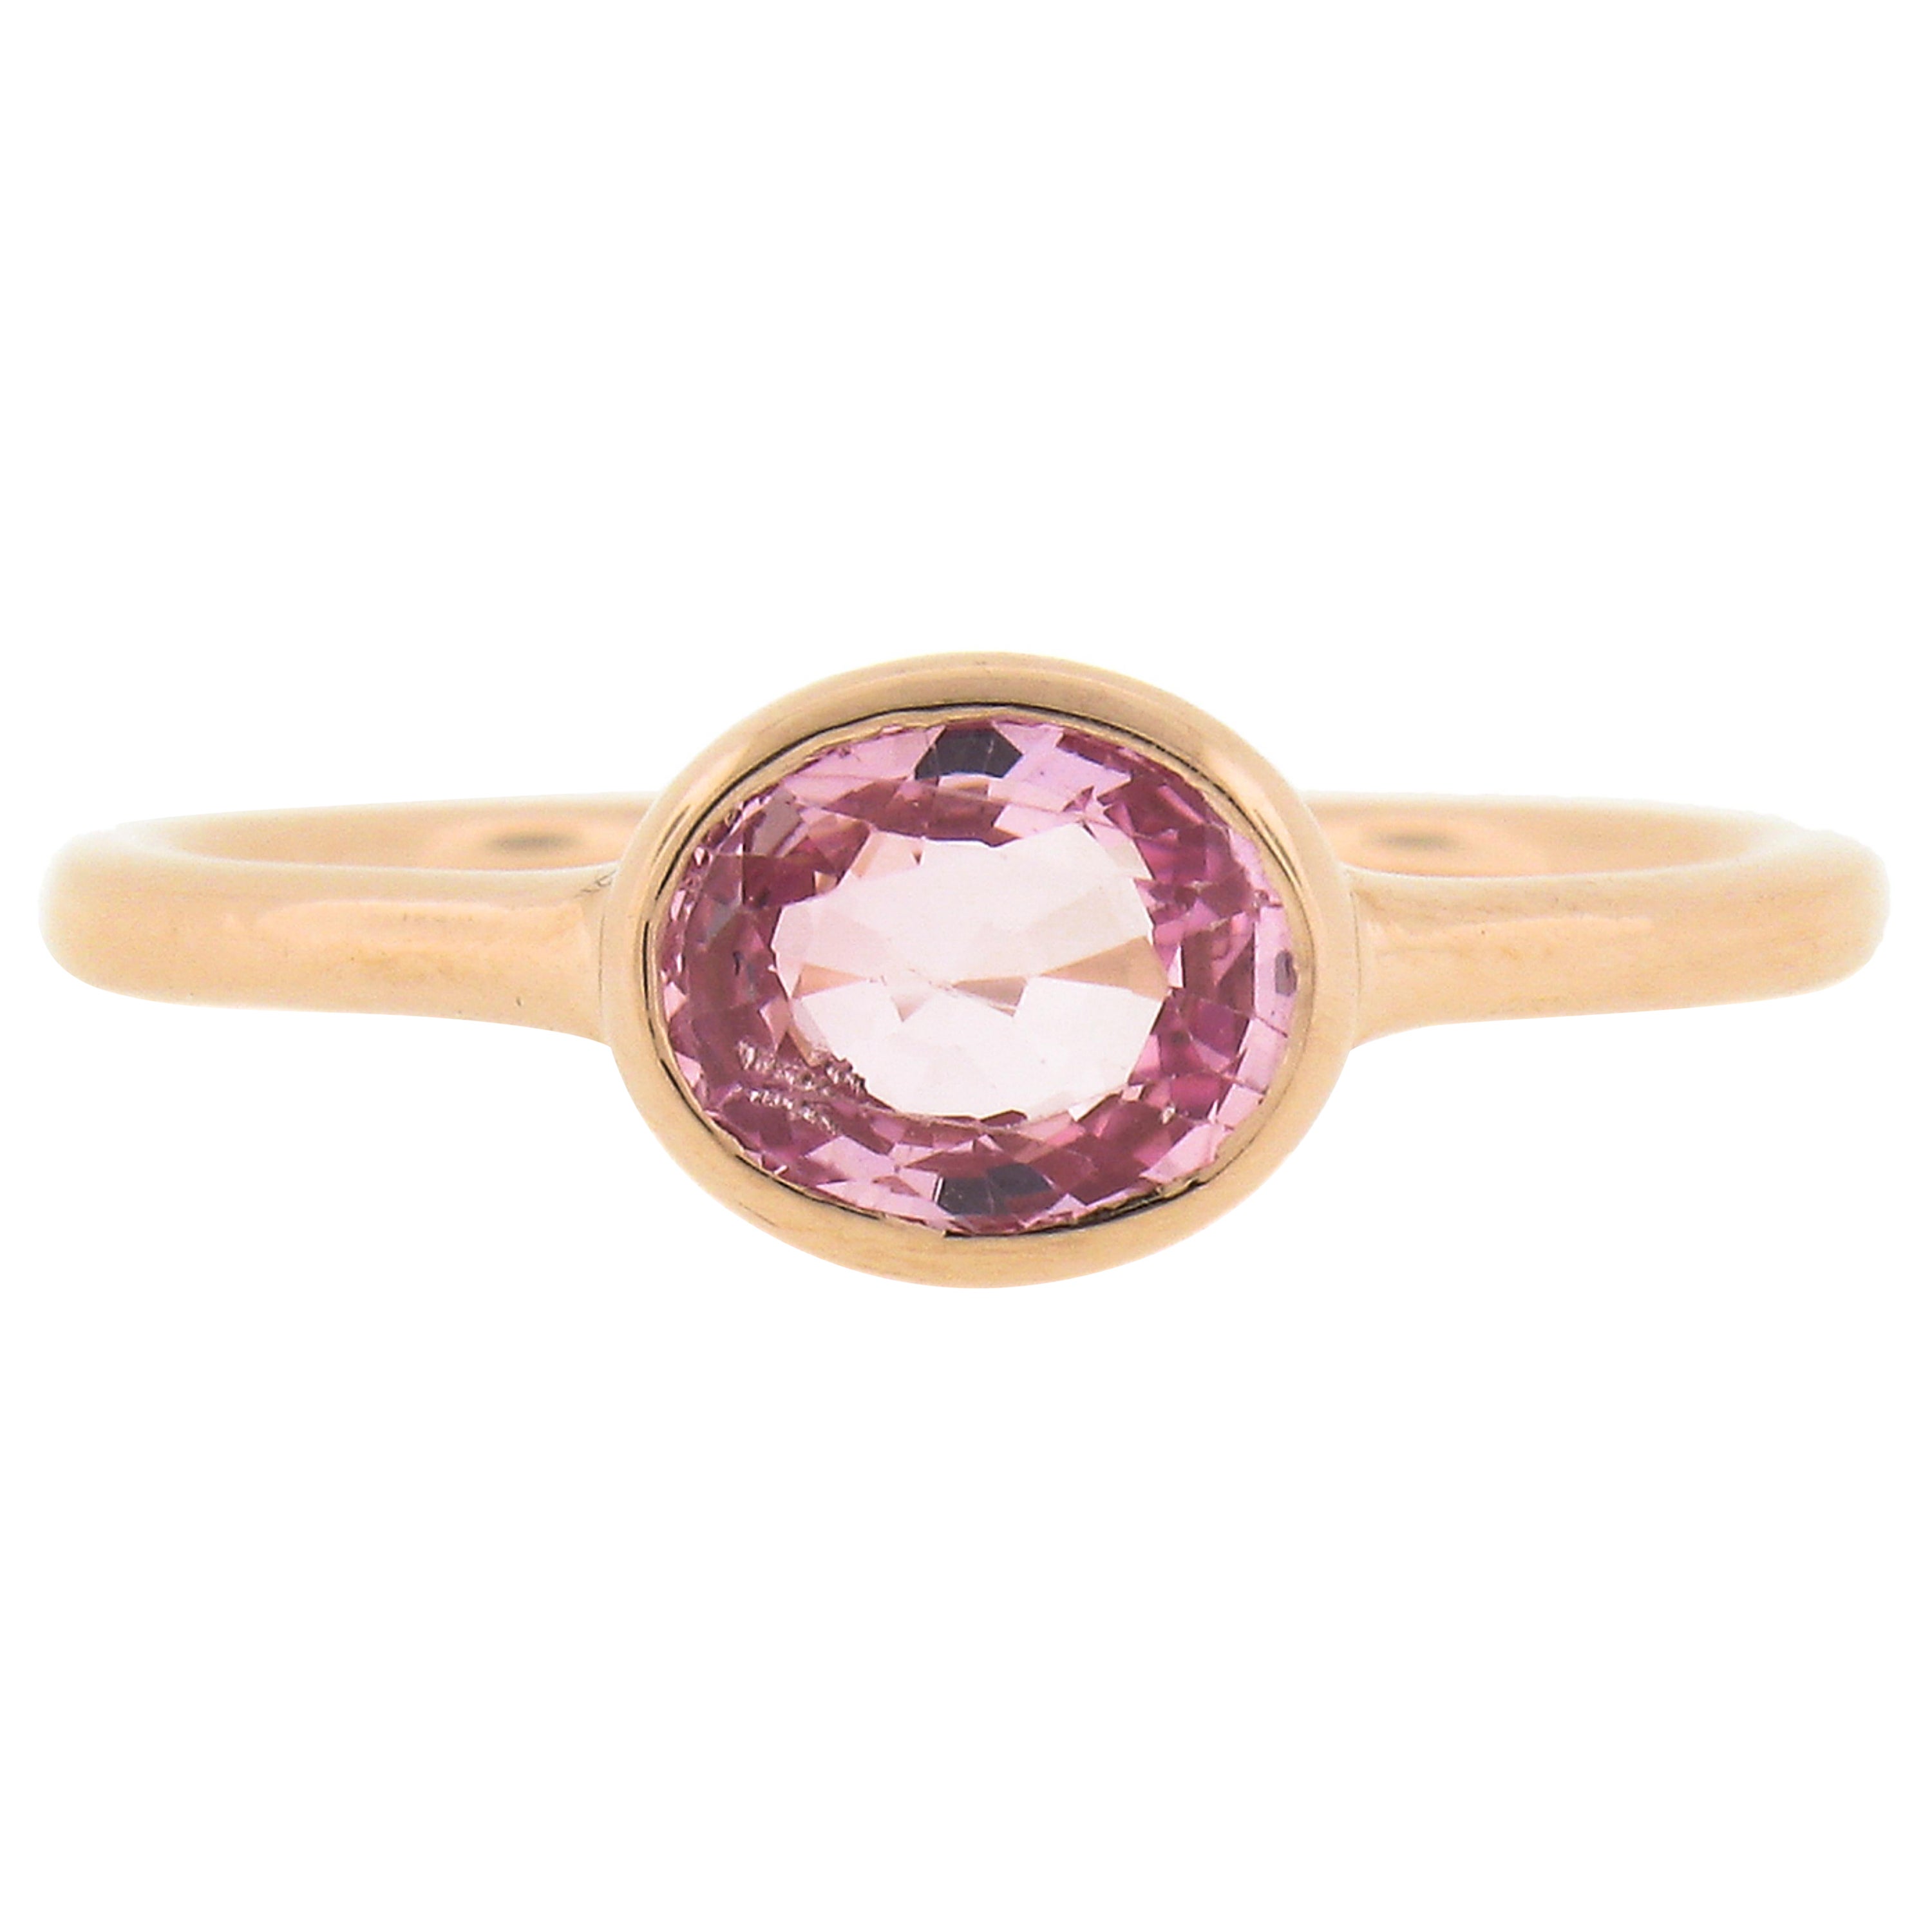 NEW 14k Rose Gold 1.29ctw GIA Oval Orangy Pink Sapphire Bezel Solitaire Ring en vente